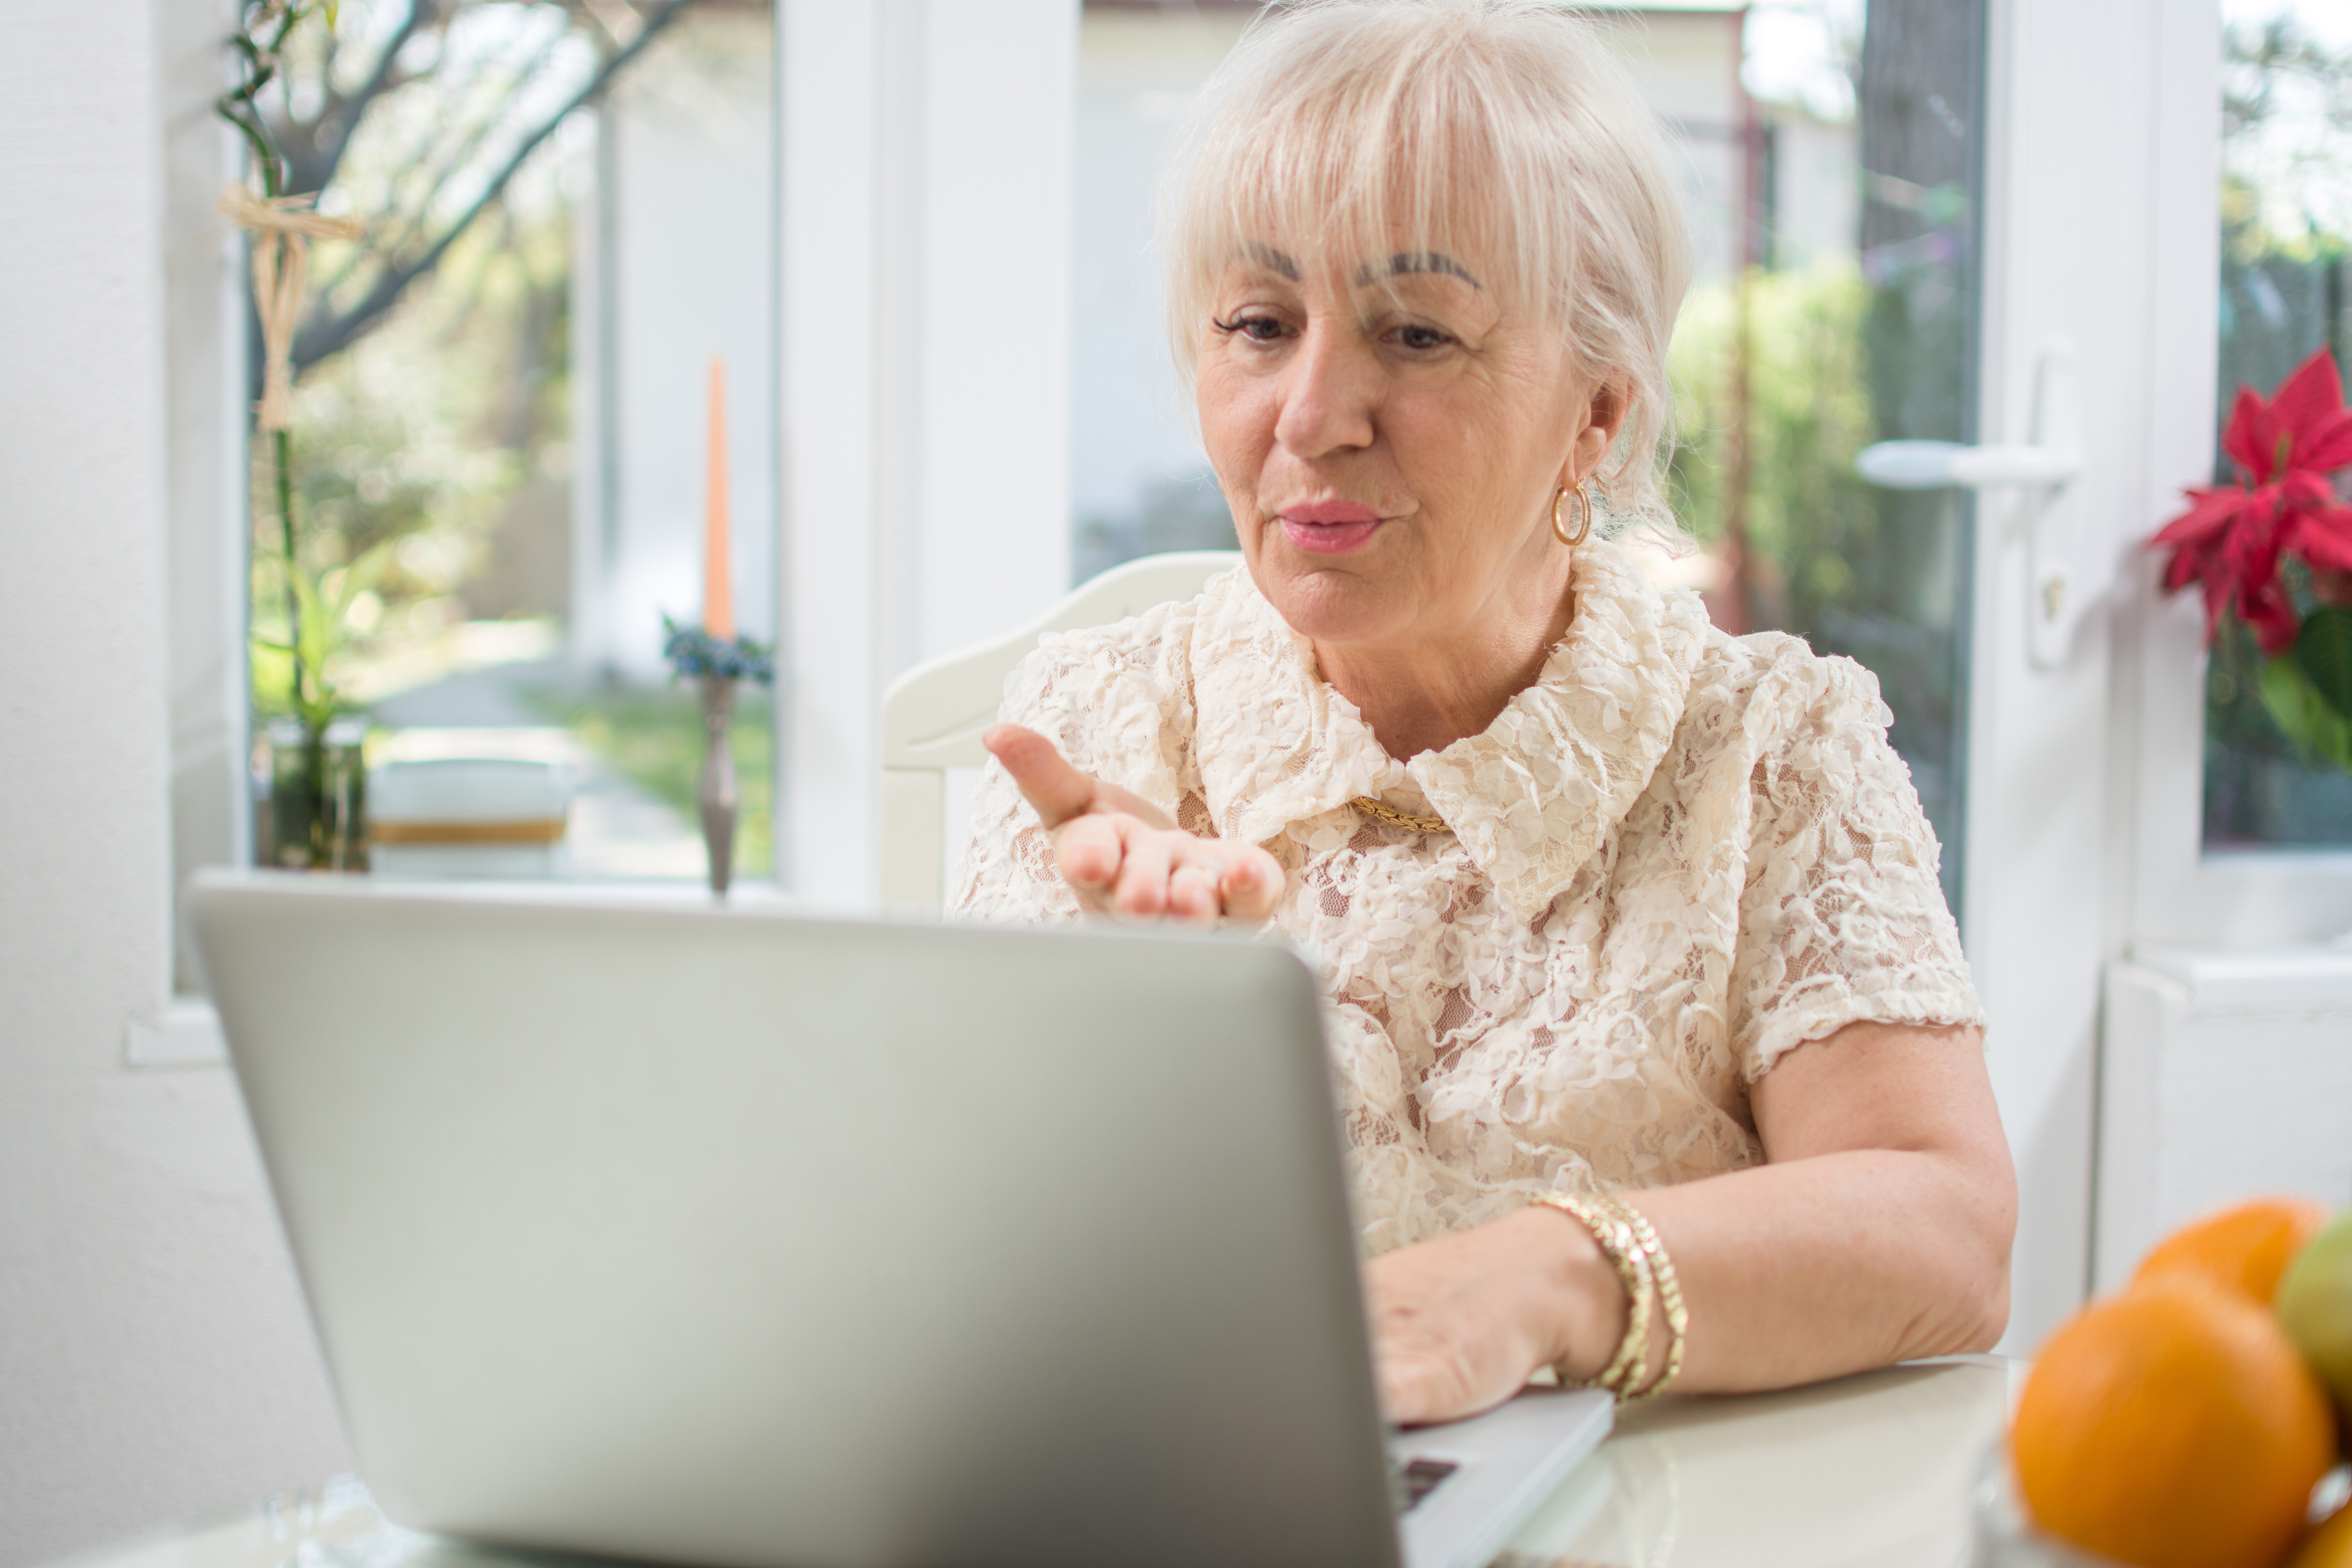 Elderly woman gesturing during a laptop video call, with fruit bowl nearby